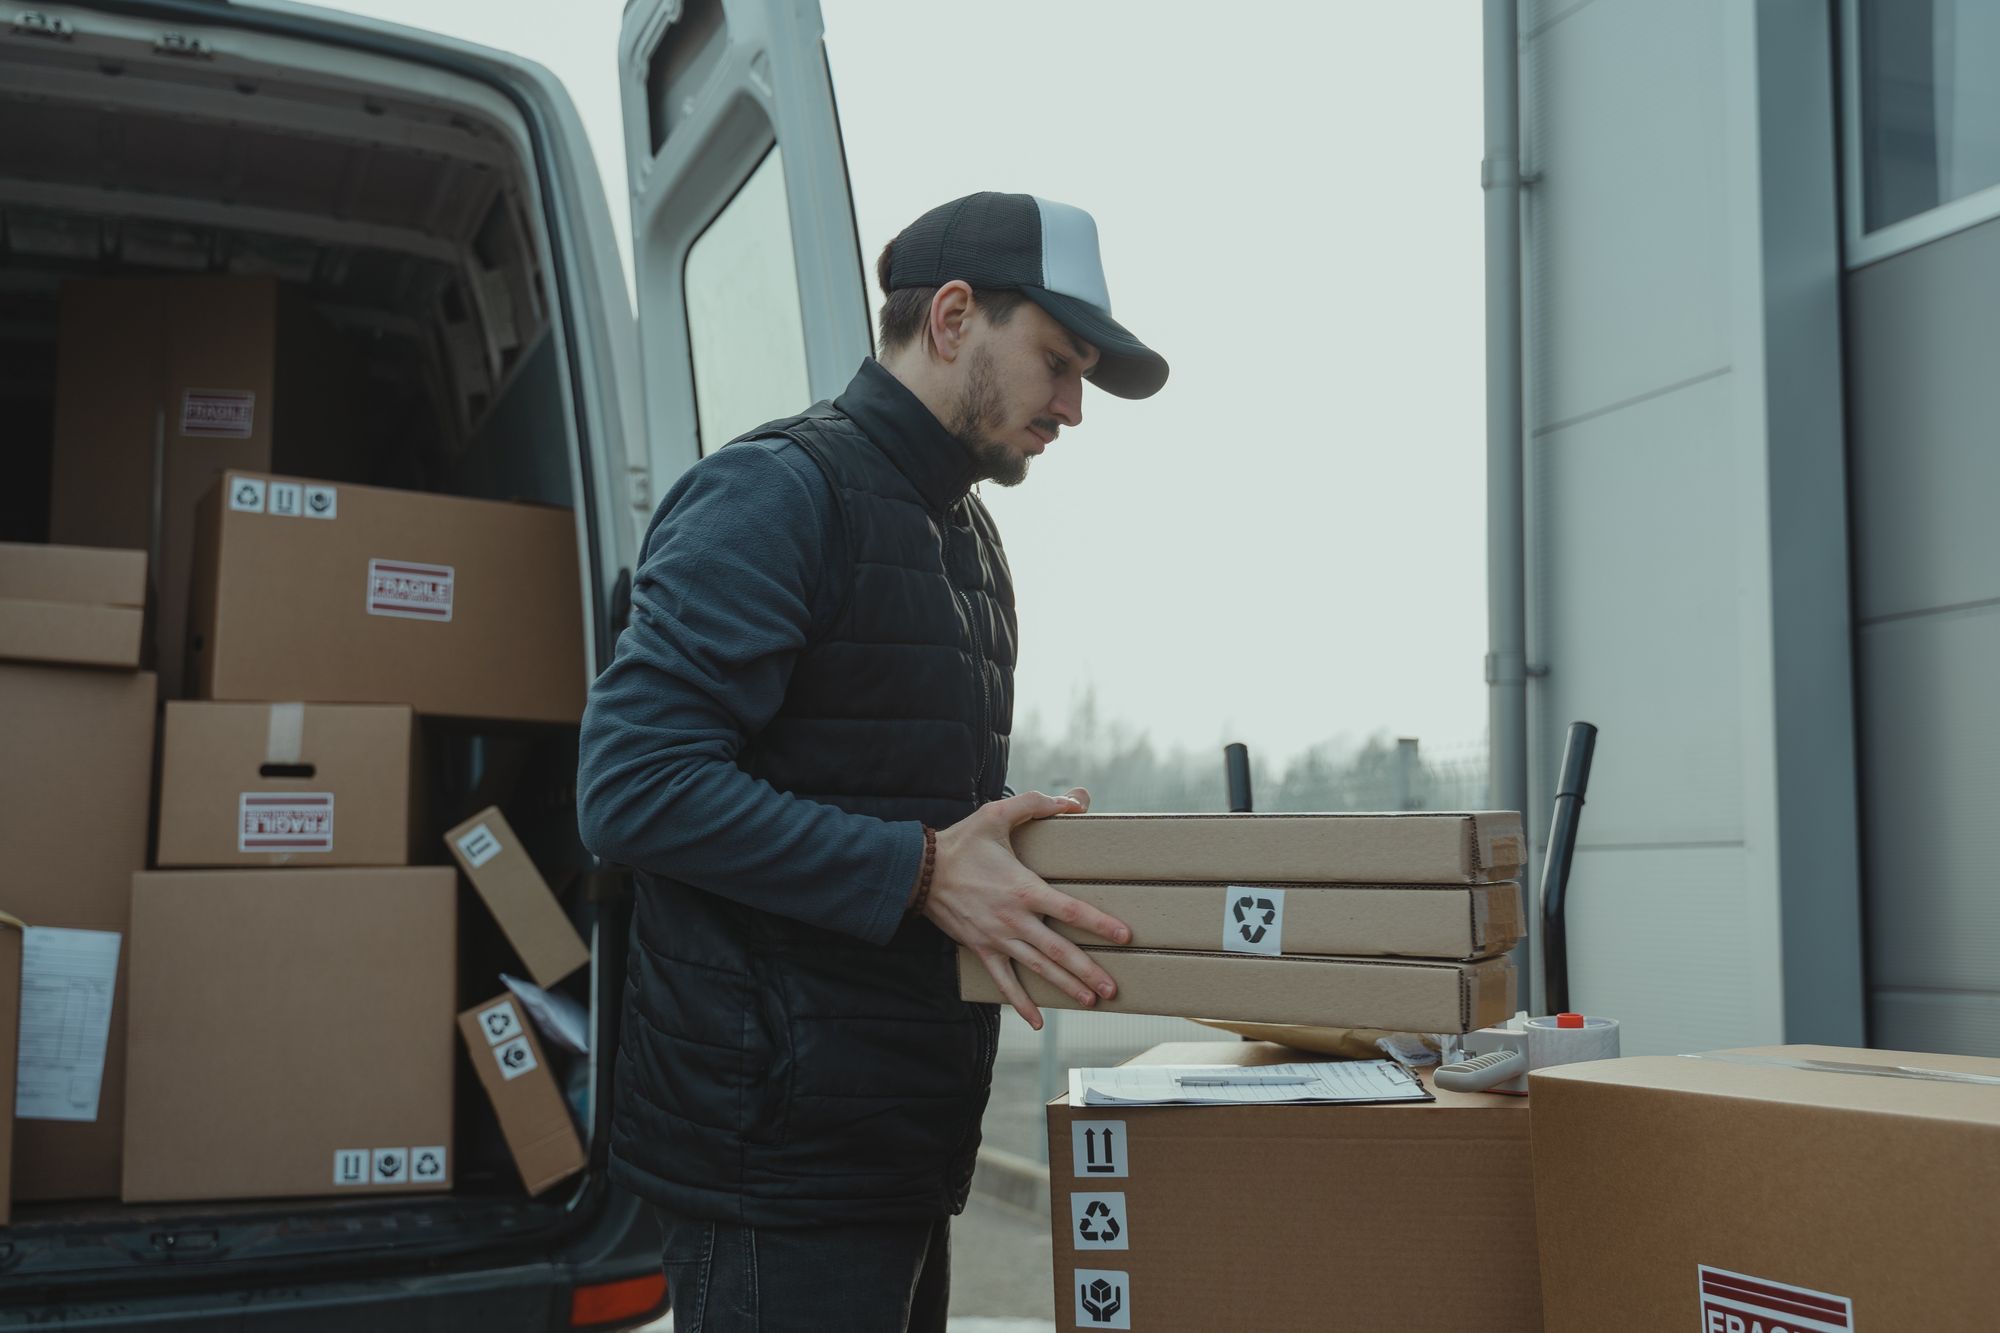 A man delivering packages by unloading boxes from a vehicle